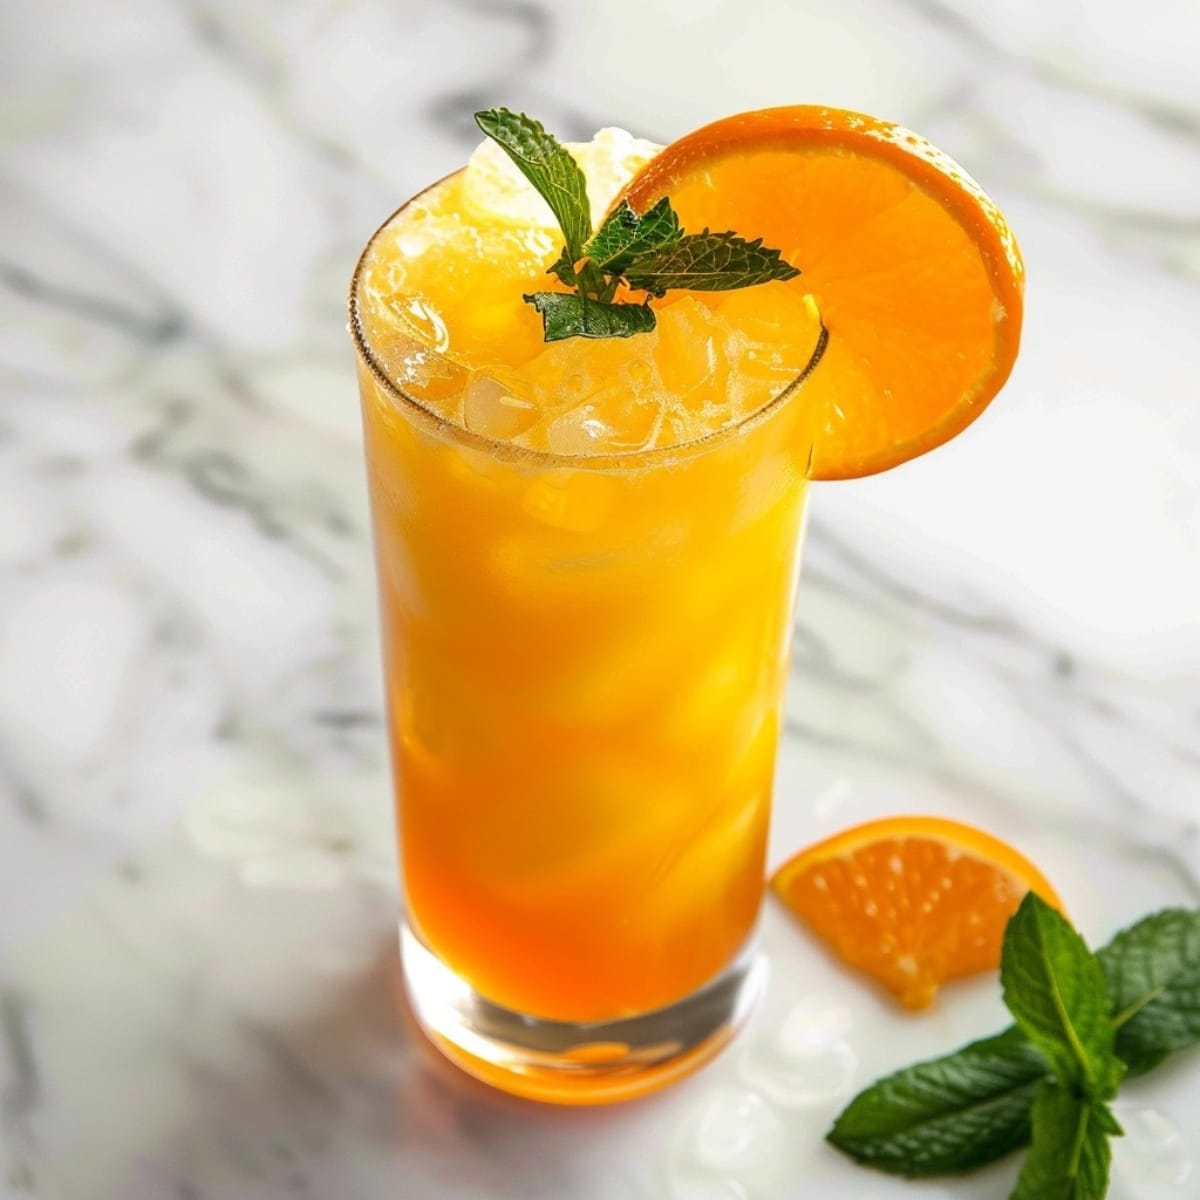 Ice filled orange crush cocktail with mint sprig and orange garnished on a white marble surface.